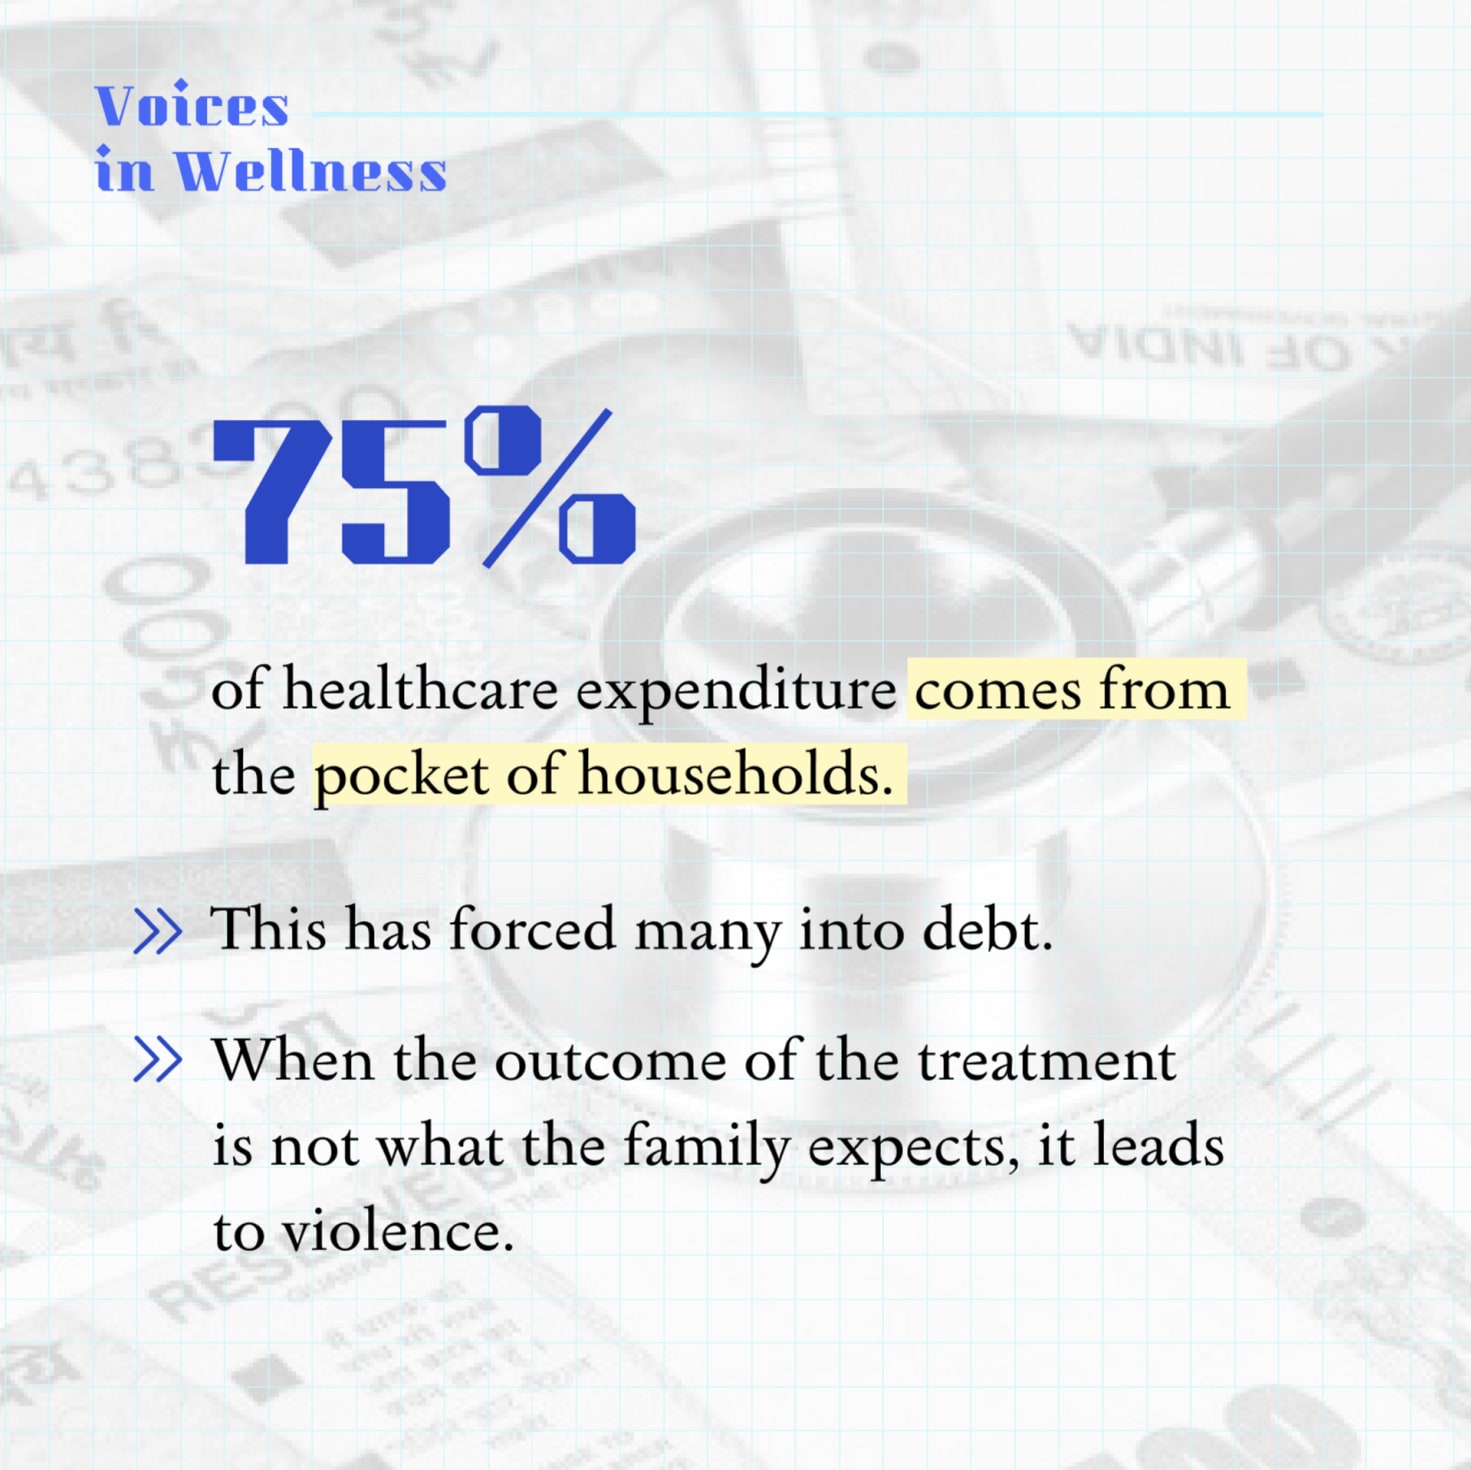 75% of healthcare expenditure comes from the pocket of households in India